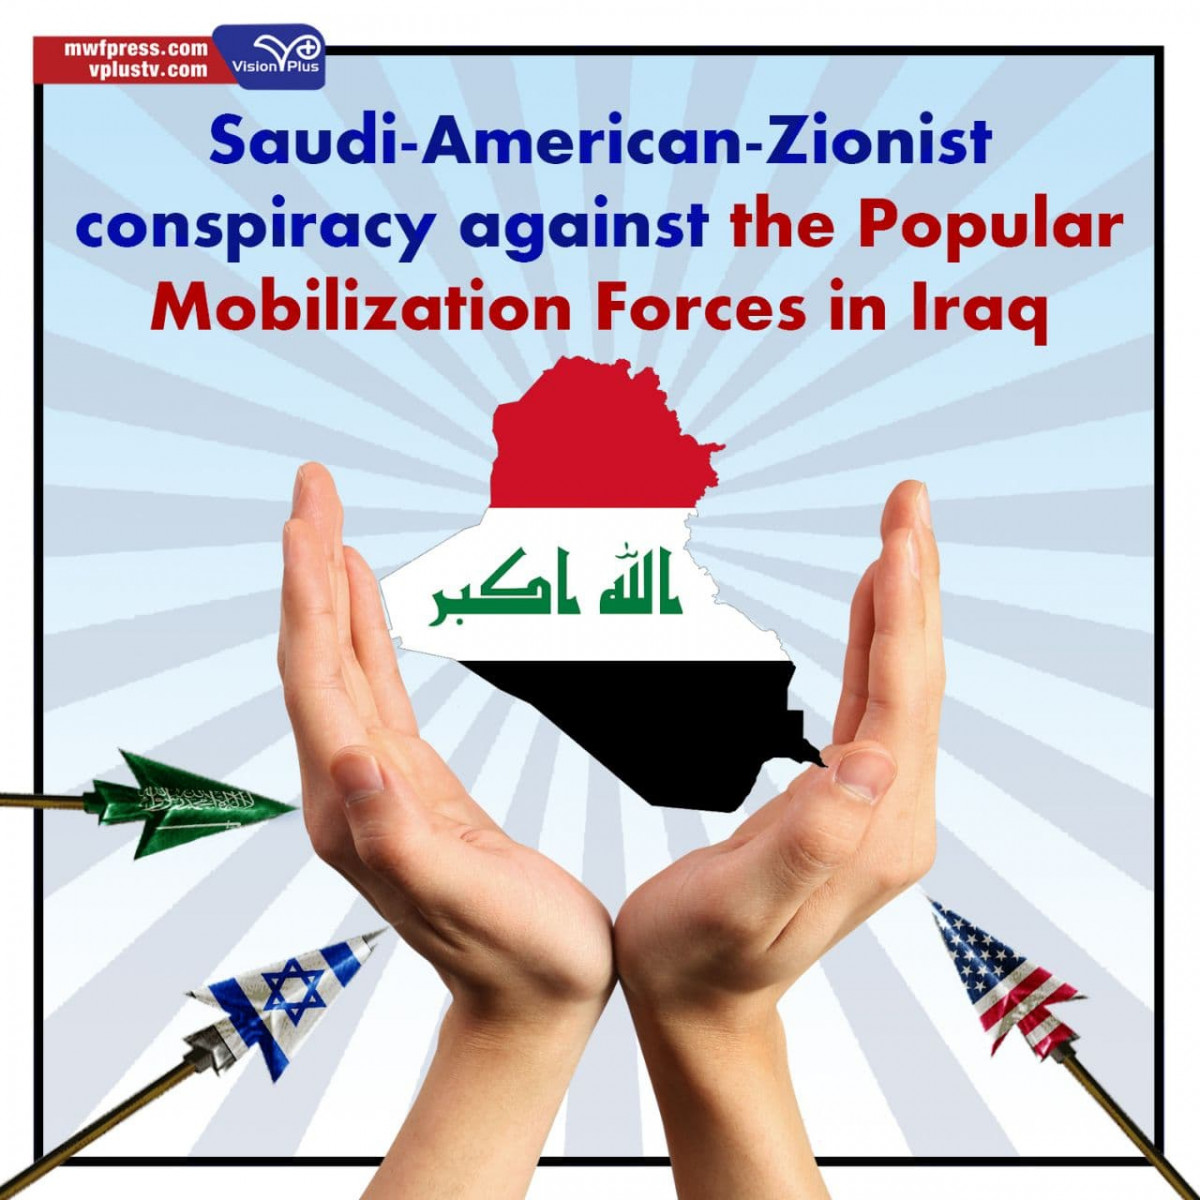 Saudi-American-Zionist conspiracy against the Popular Mobilization Forces in Iraq